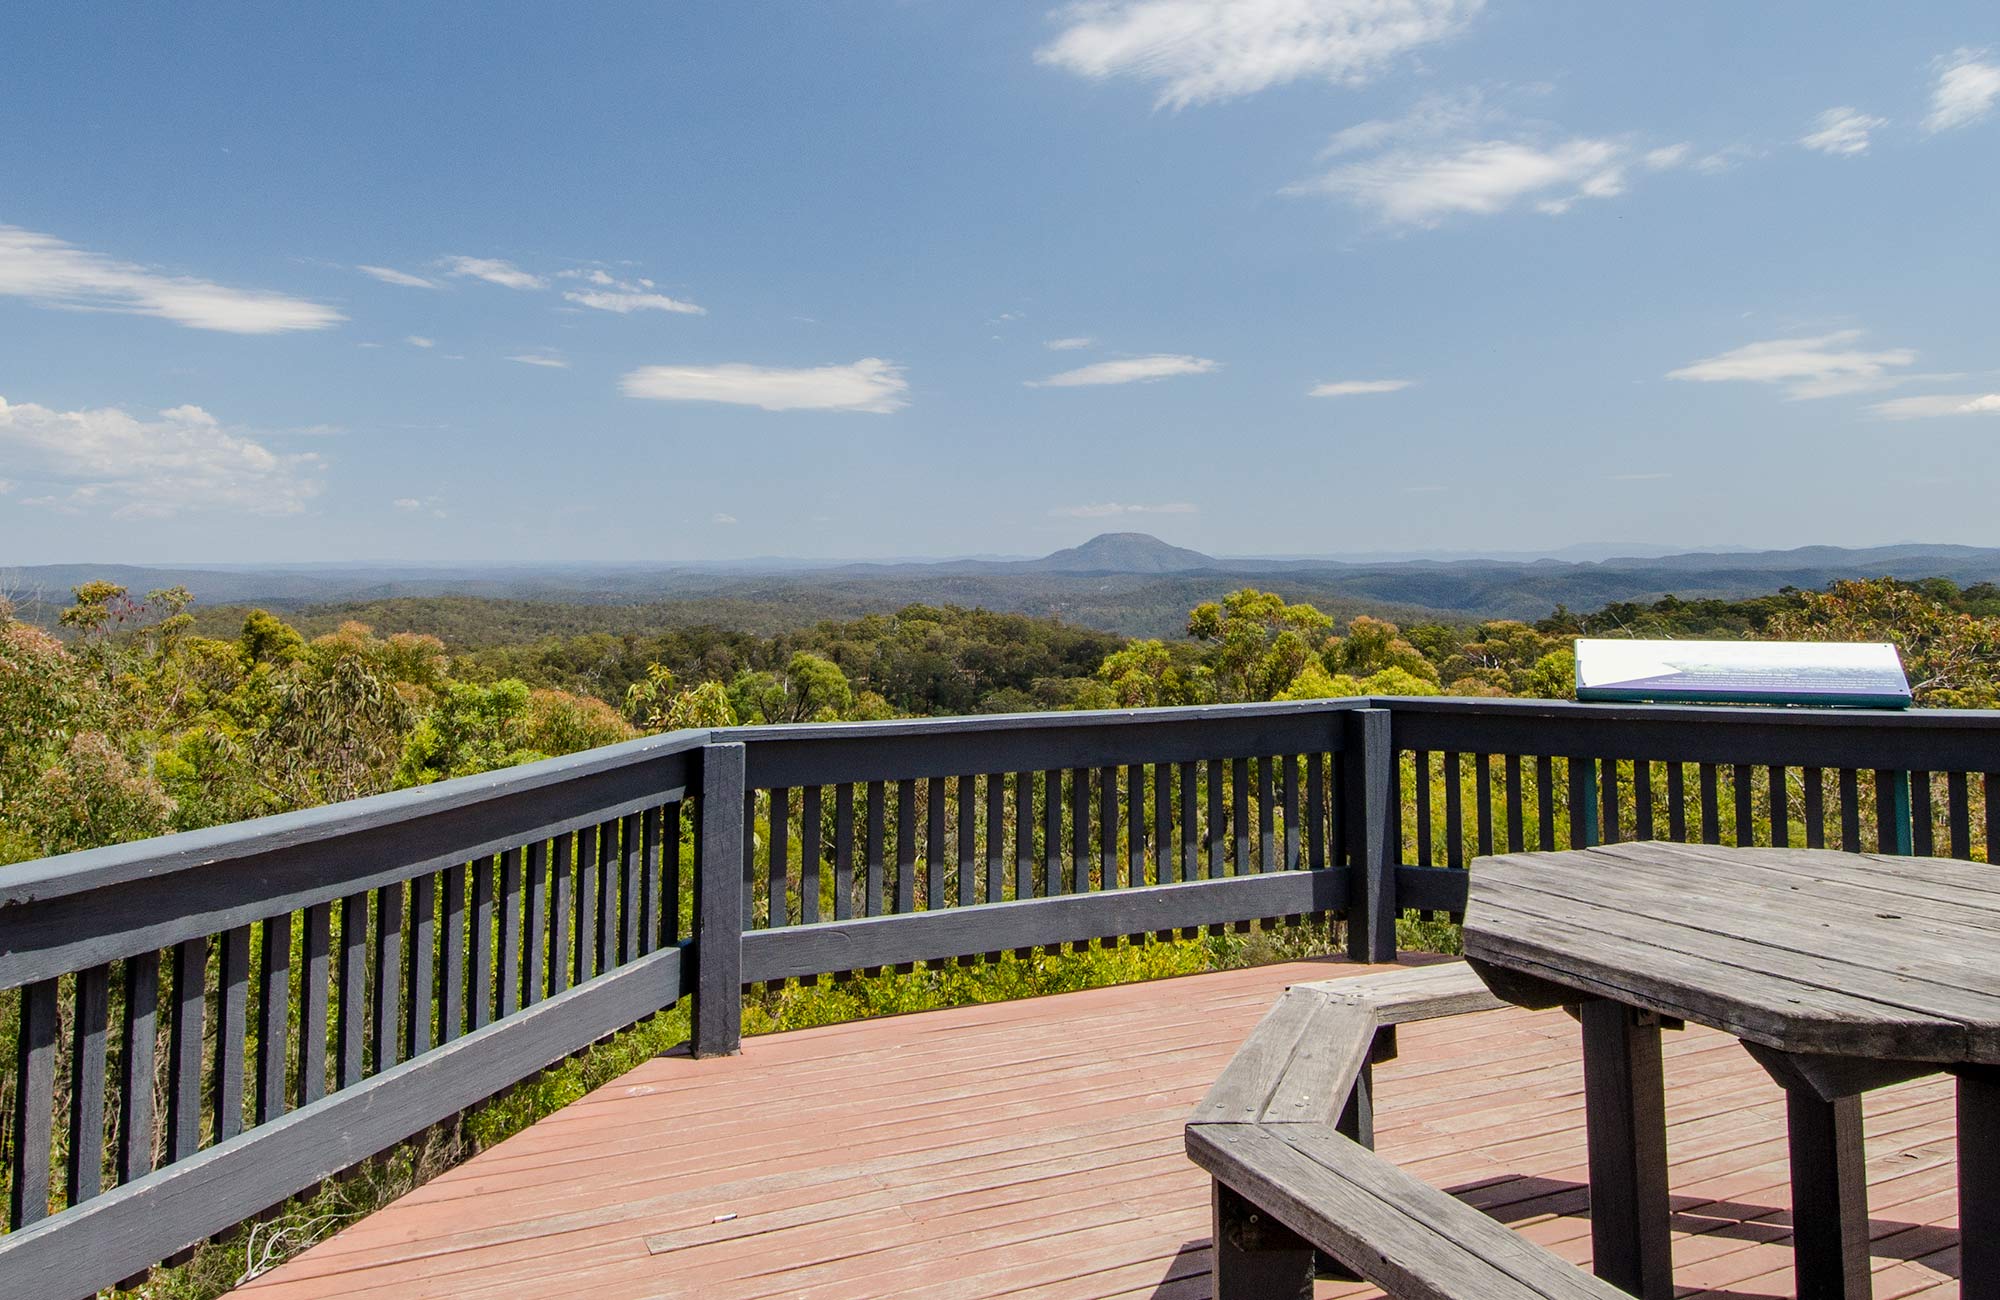 Finchley lookout, Yengo National Park. Photo: John Spencer